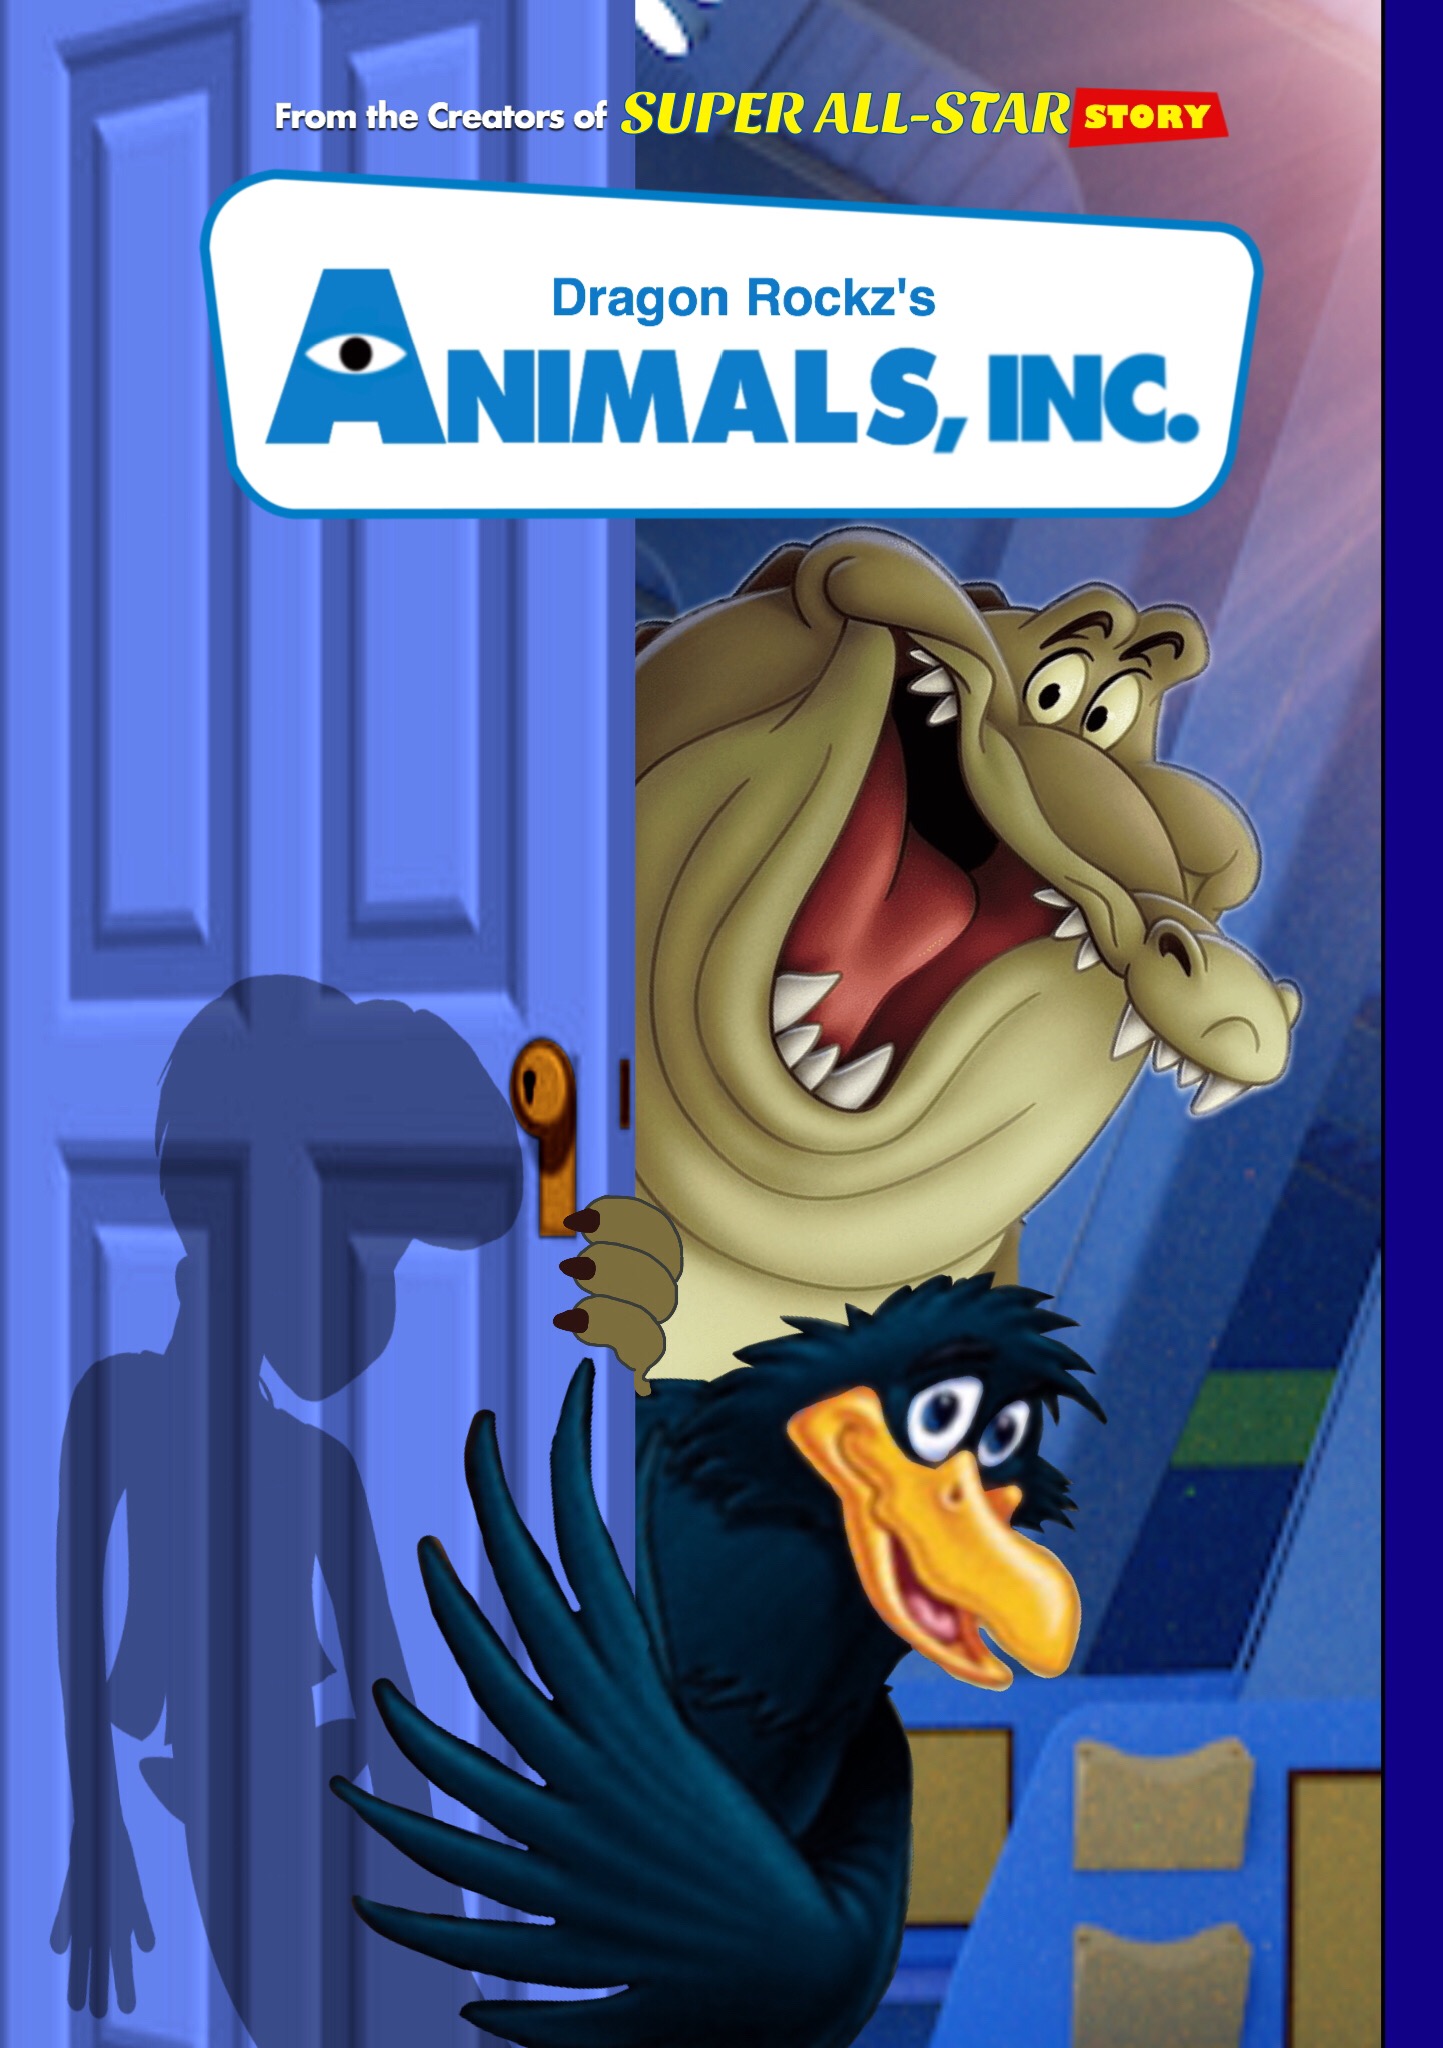 Monsters, Inc. Characters, Spoof Wiki